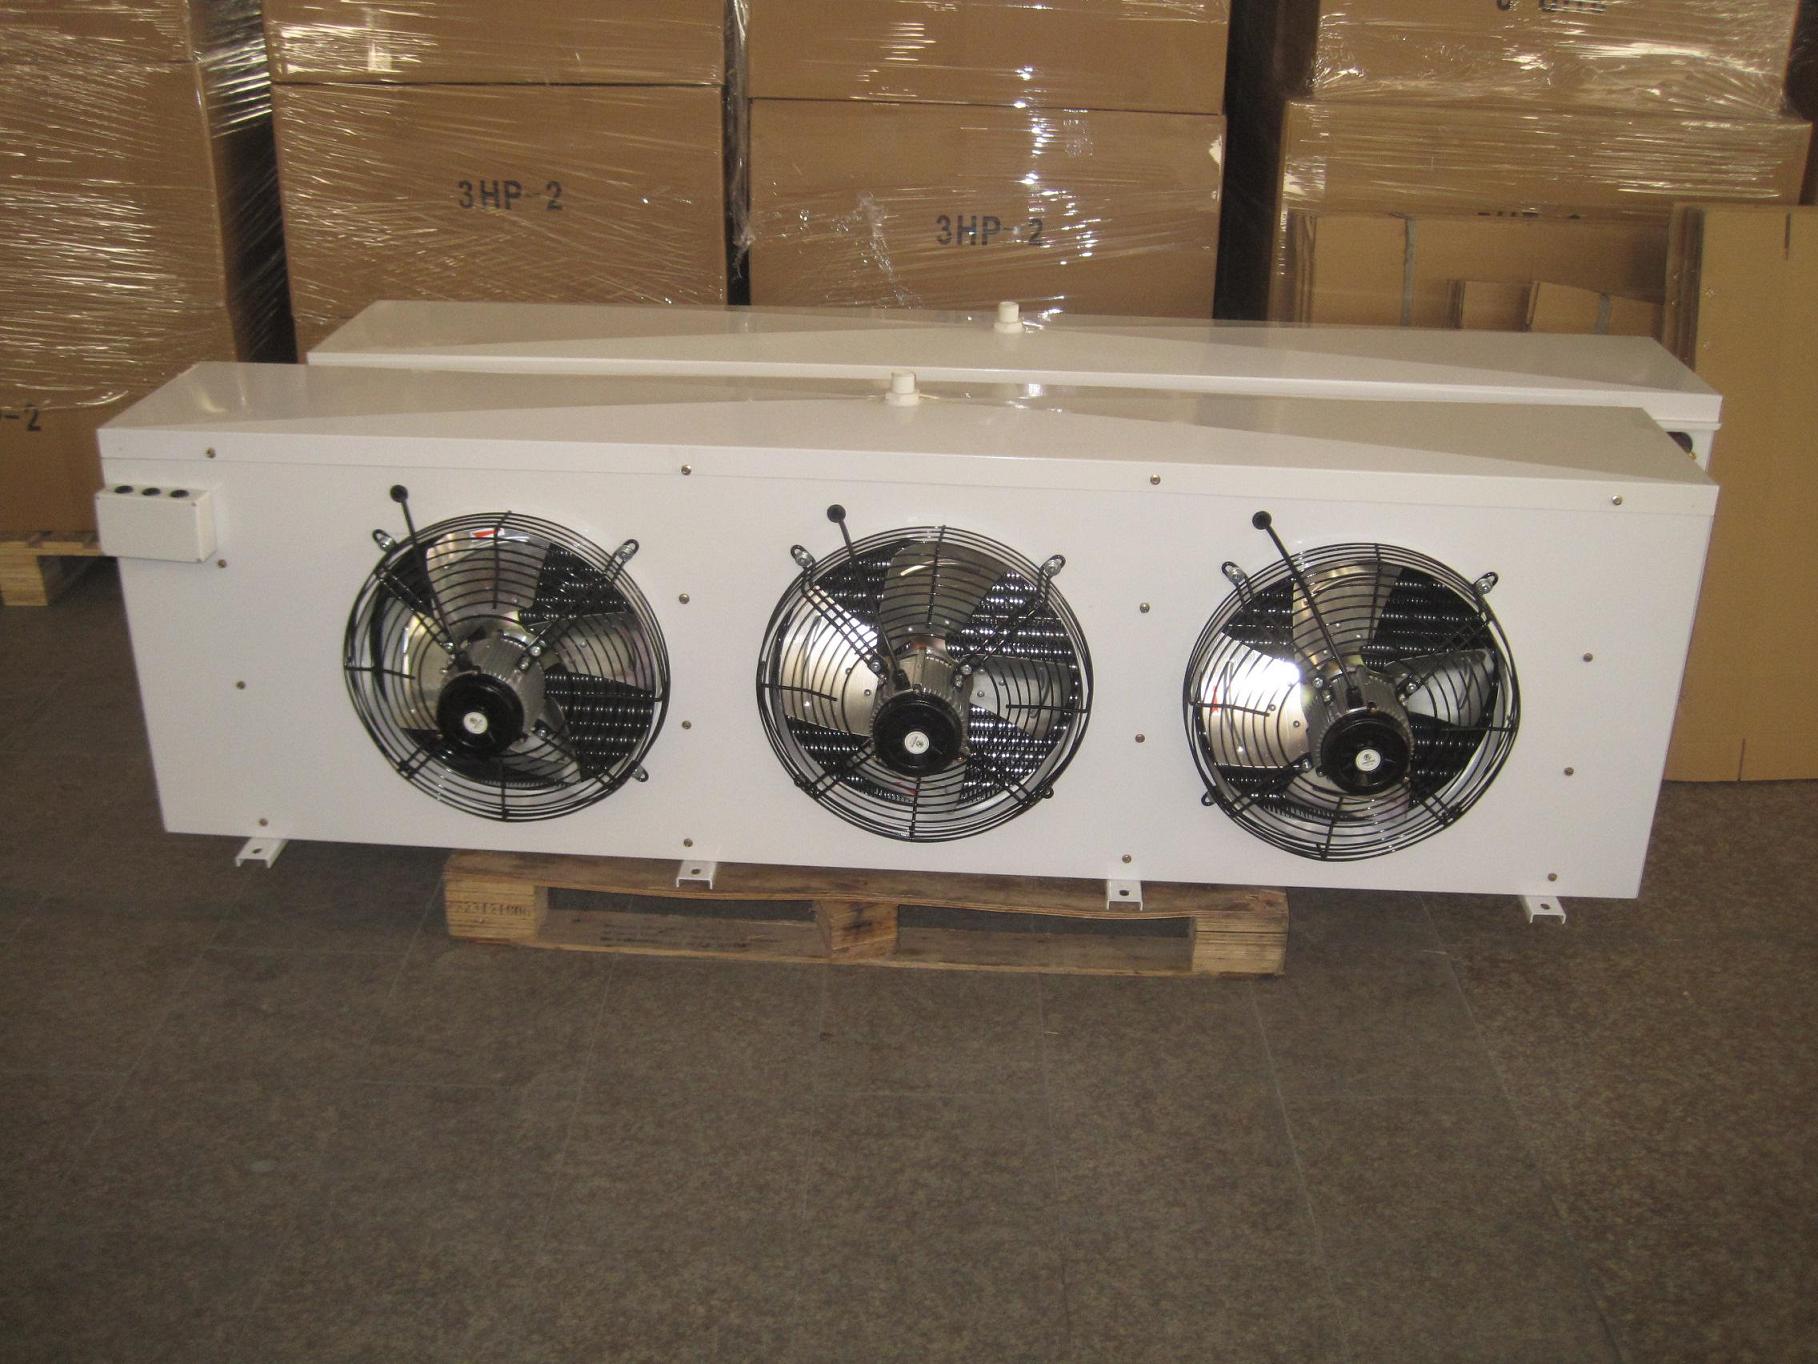 Air Unit Cooler For Low Temperature Cold Room